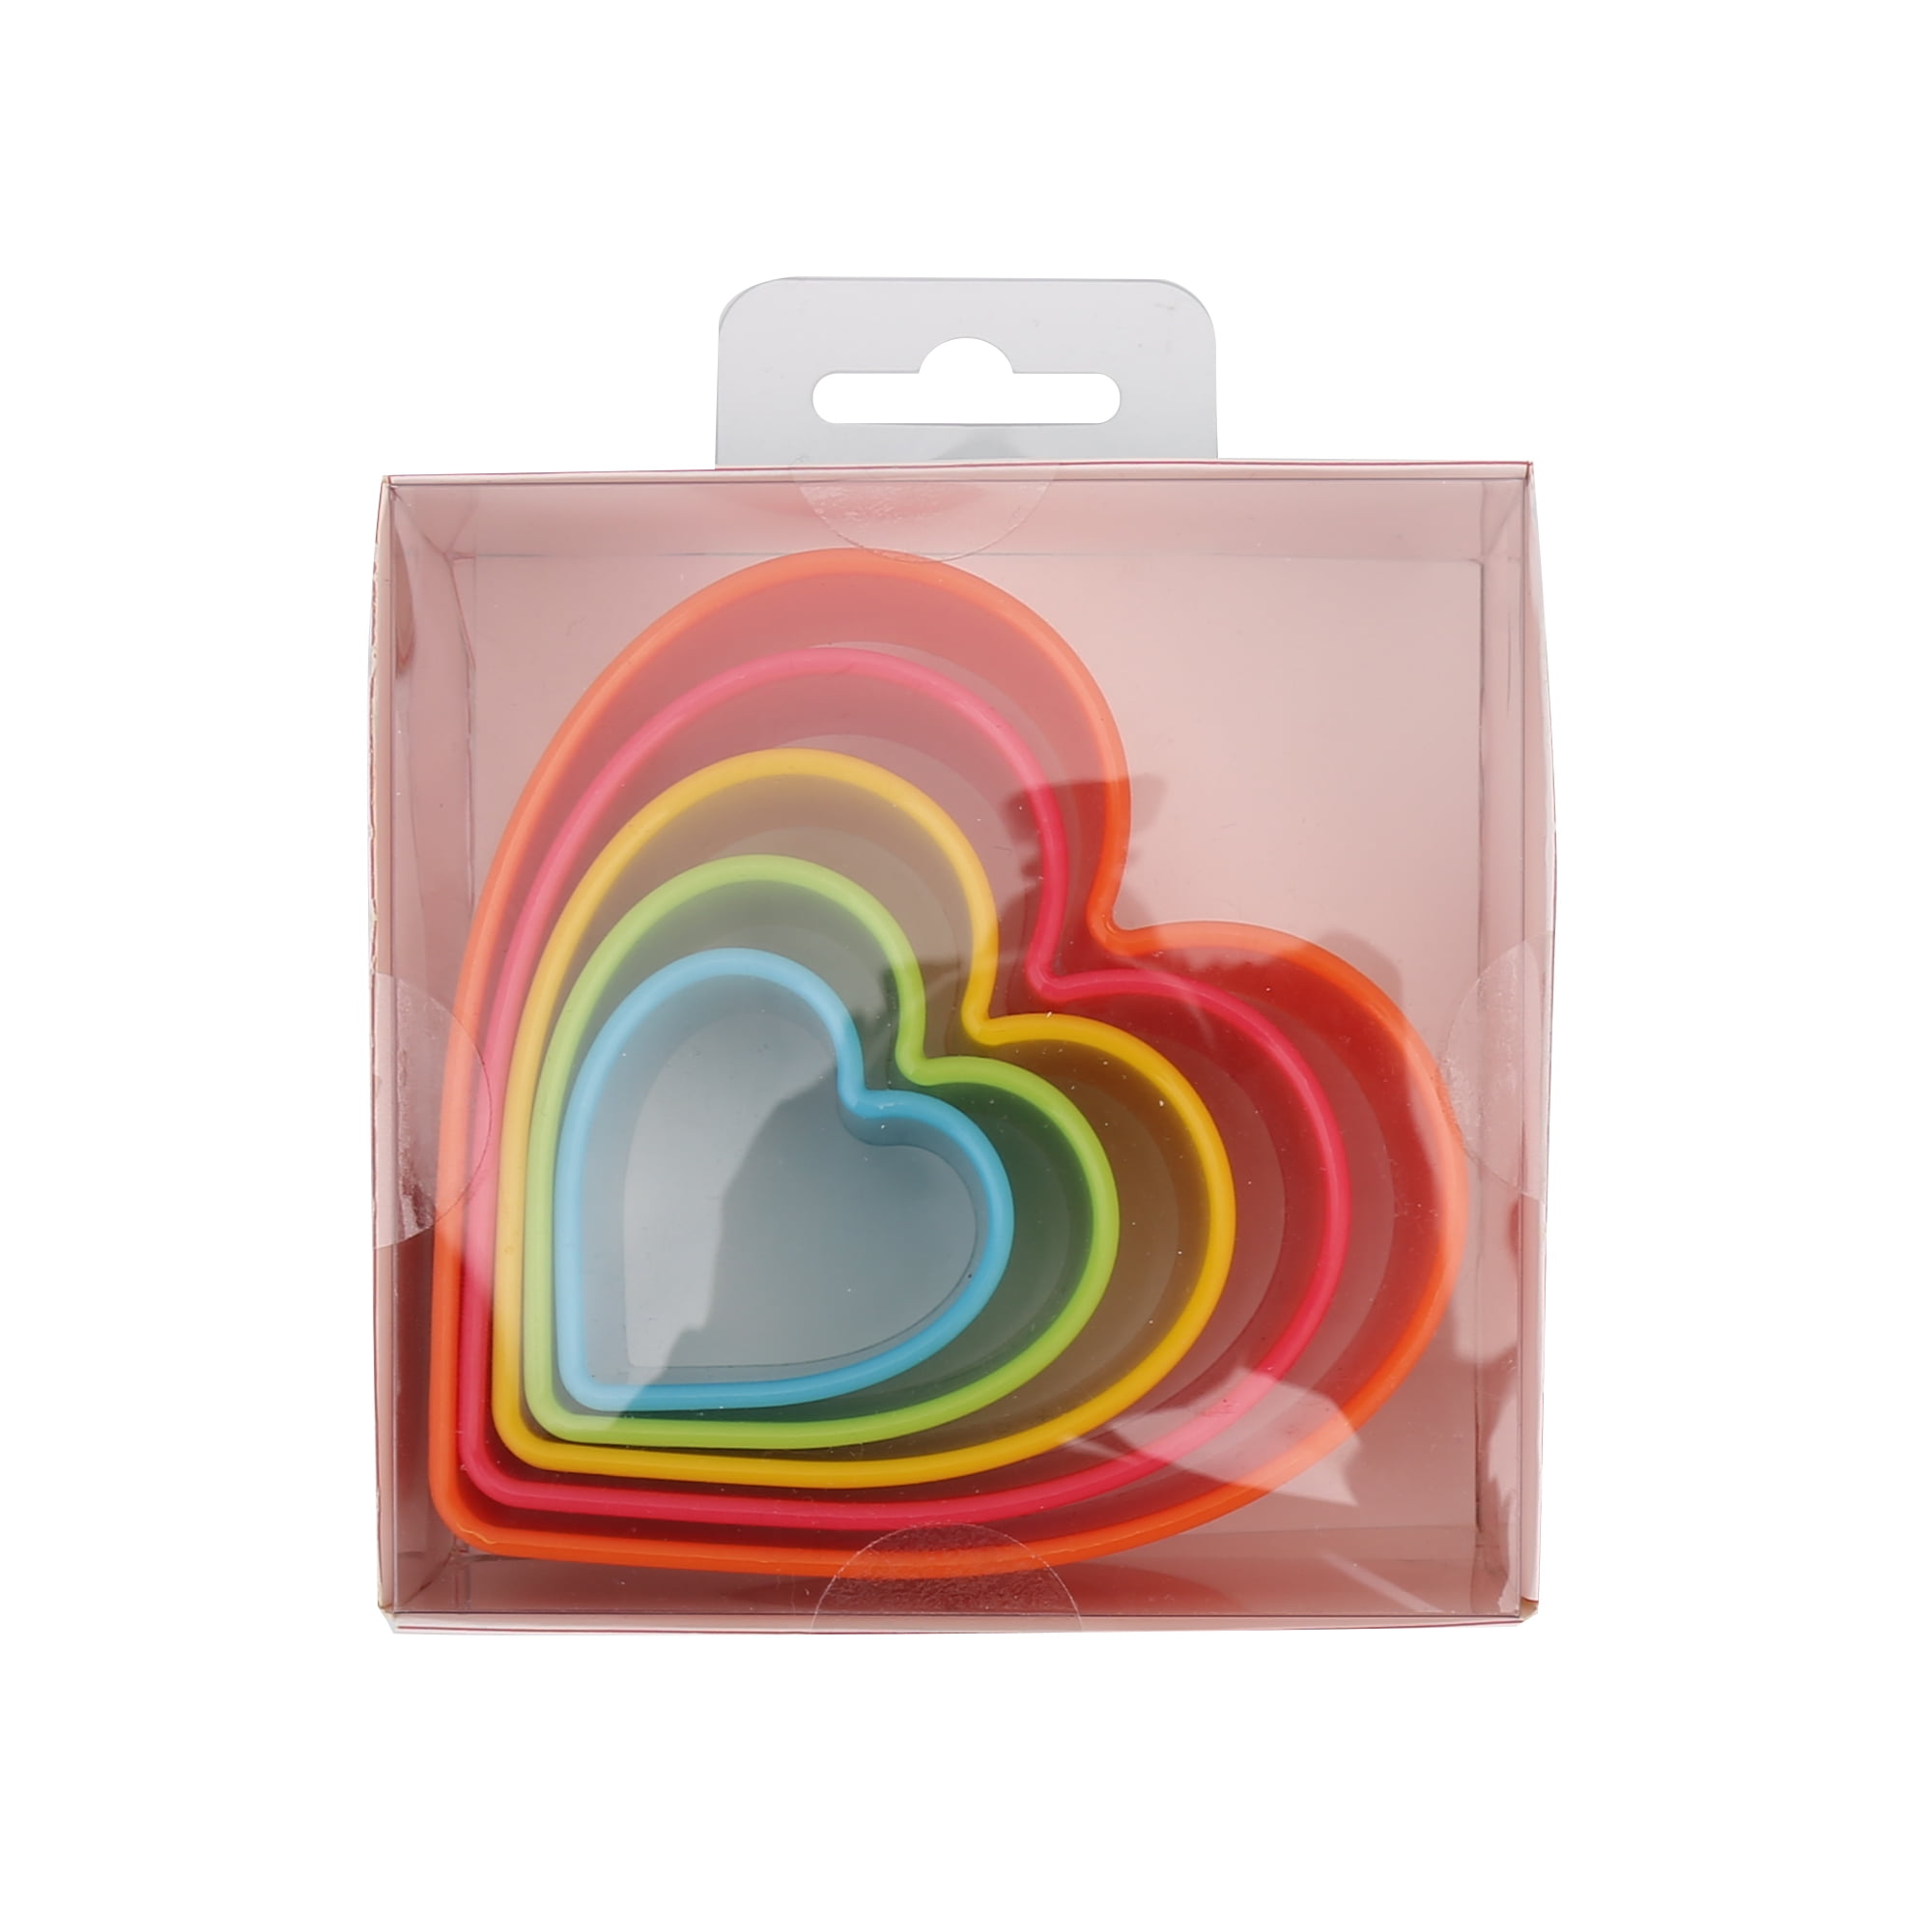  Chef Craft Select Plastic Heart Cookie Cutter, 5 Piece Set,  Red: Home & Kitchen